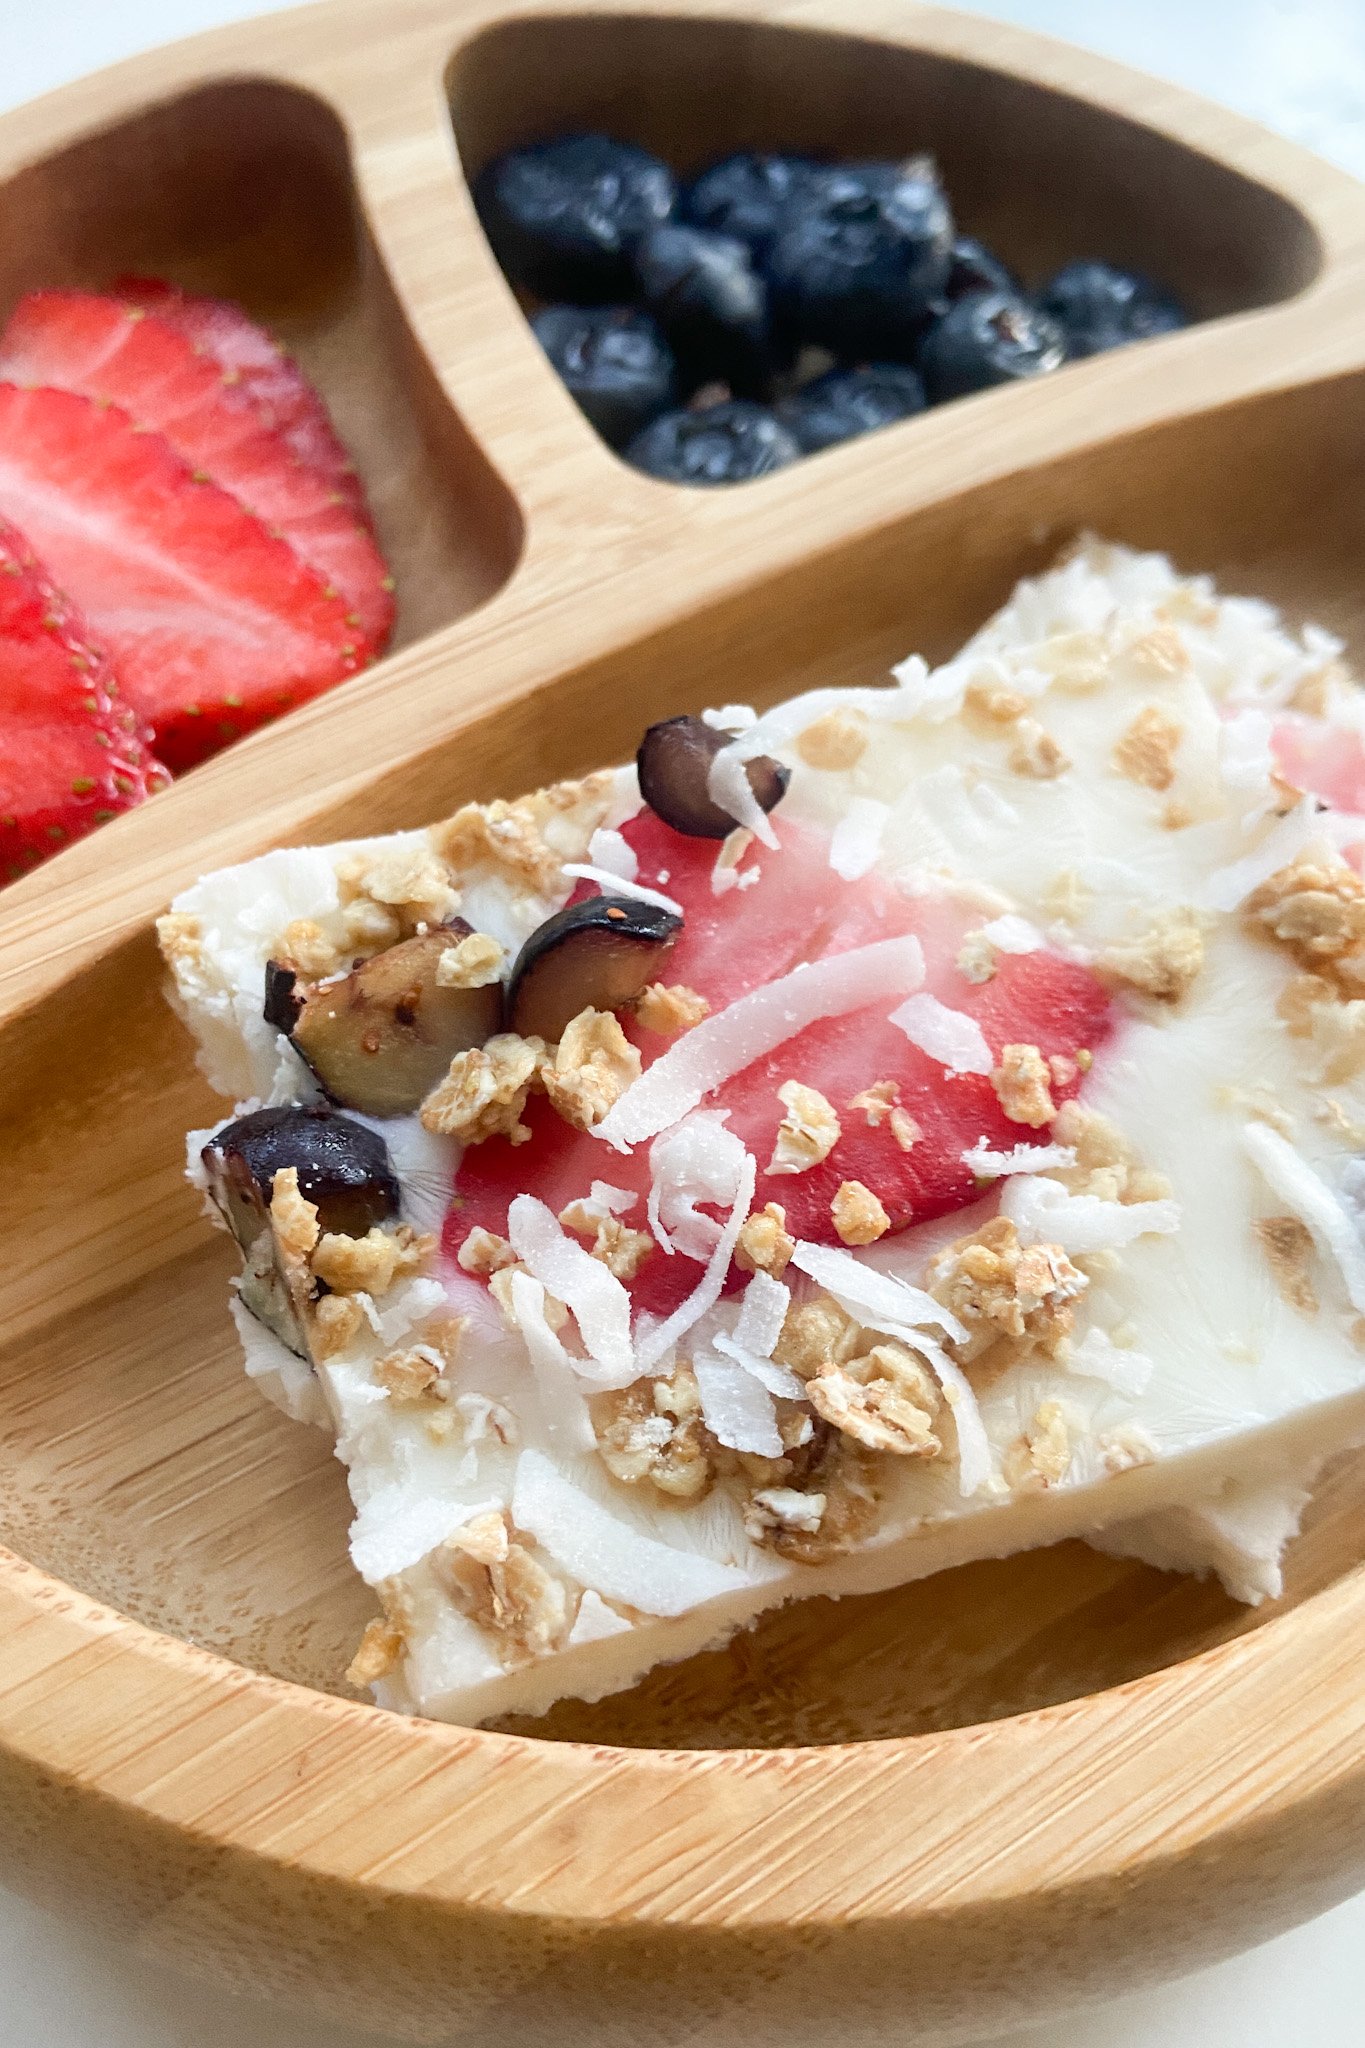 Frozen yoghurt bark served with blueberries and strawberries